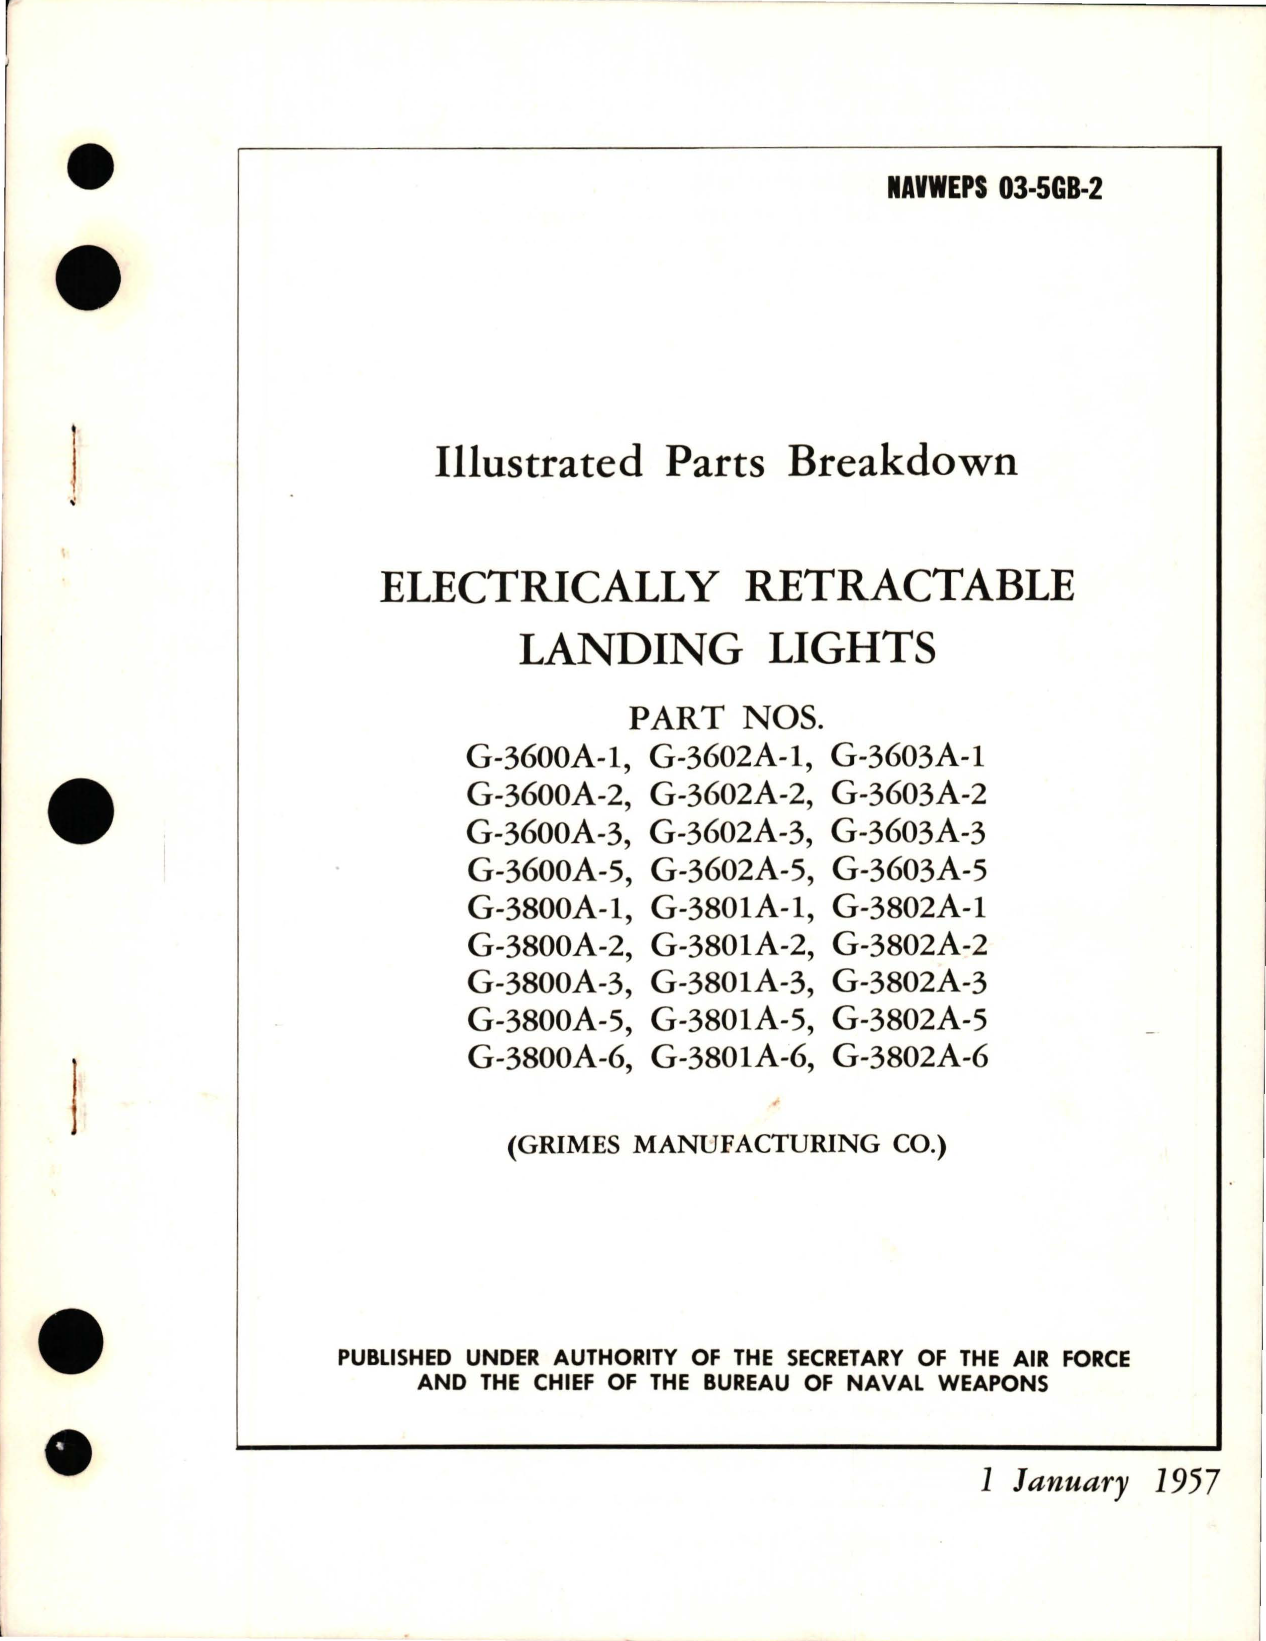 Sample page 1 from AirCorps Library document: Illustrated Parts Breakdown for Electrically Retractable Landing Lights